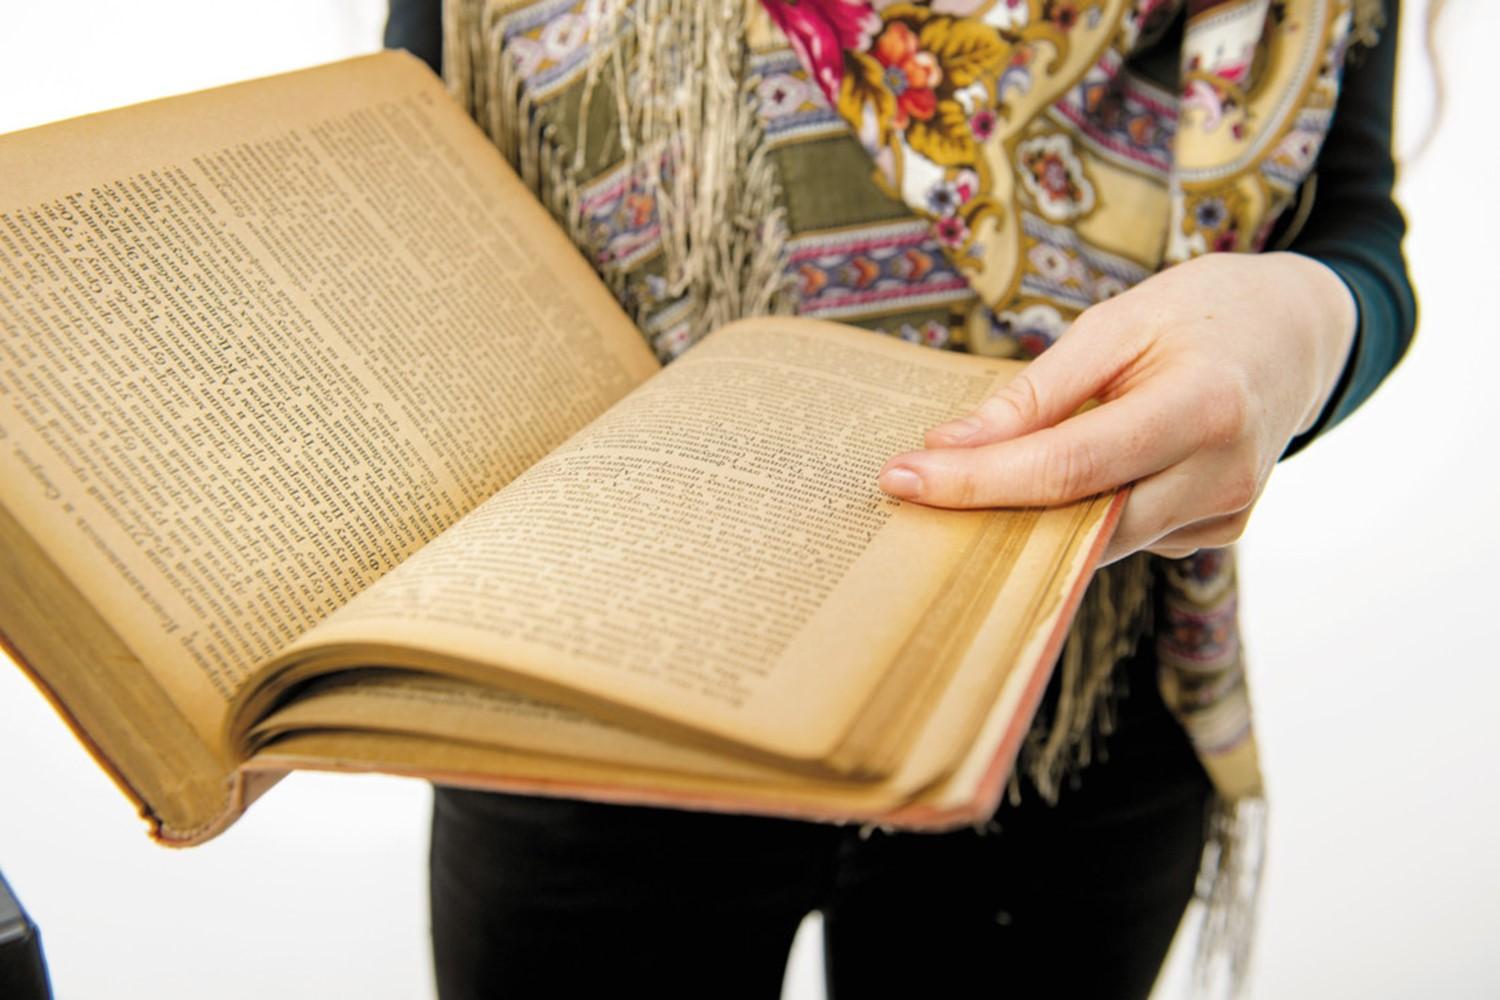 Person holding an open book